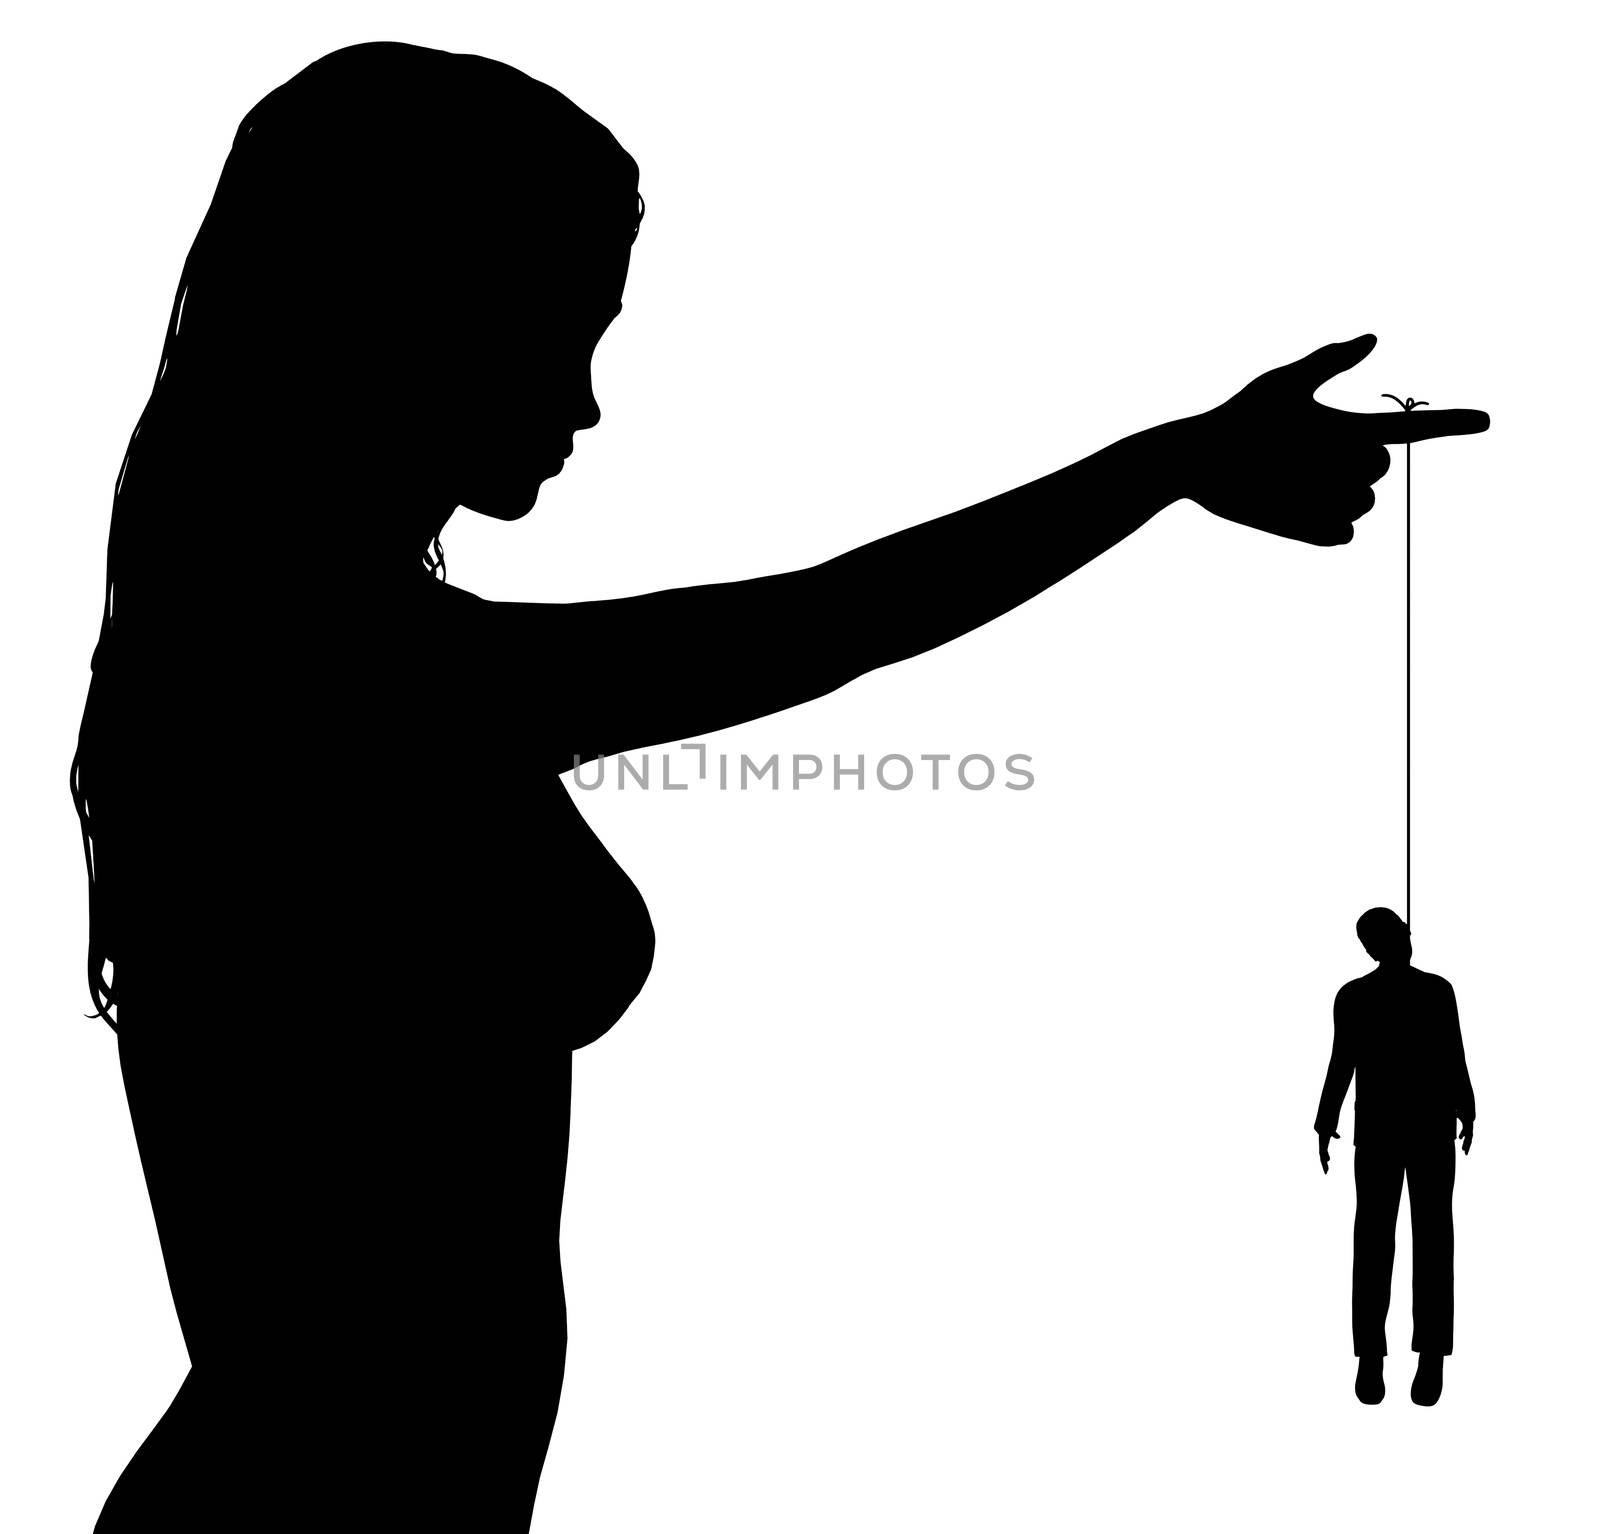 Illustration of a woman holding a man hanging from a rope